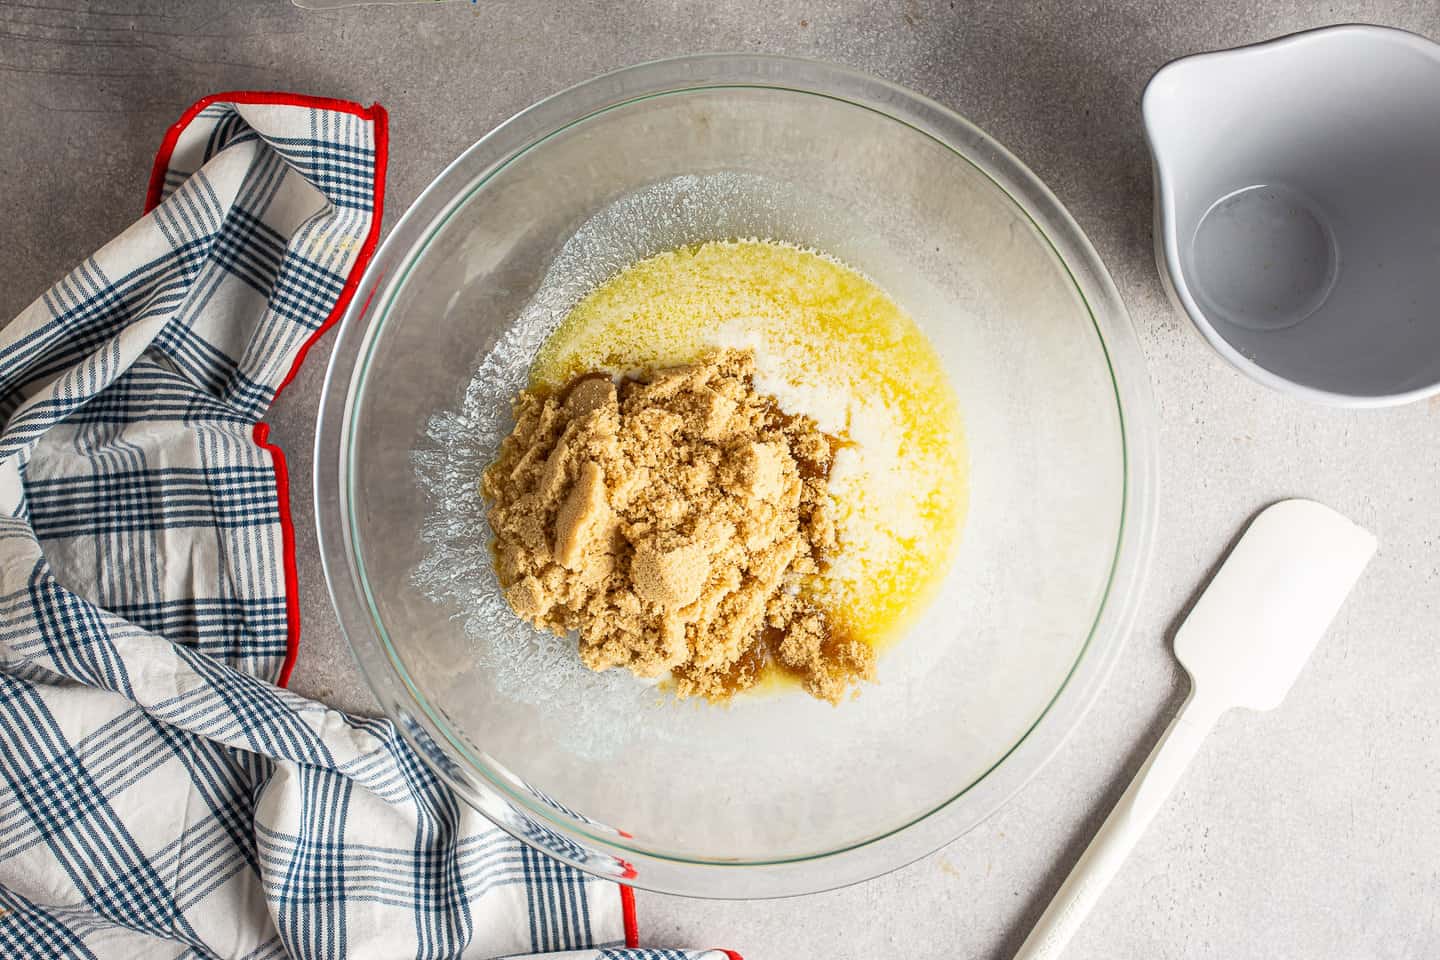 Melted butter and brown sugar in a large glass mixing bowl.